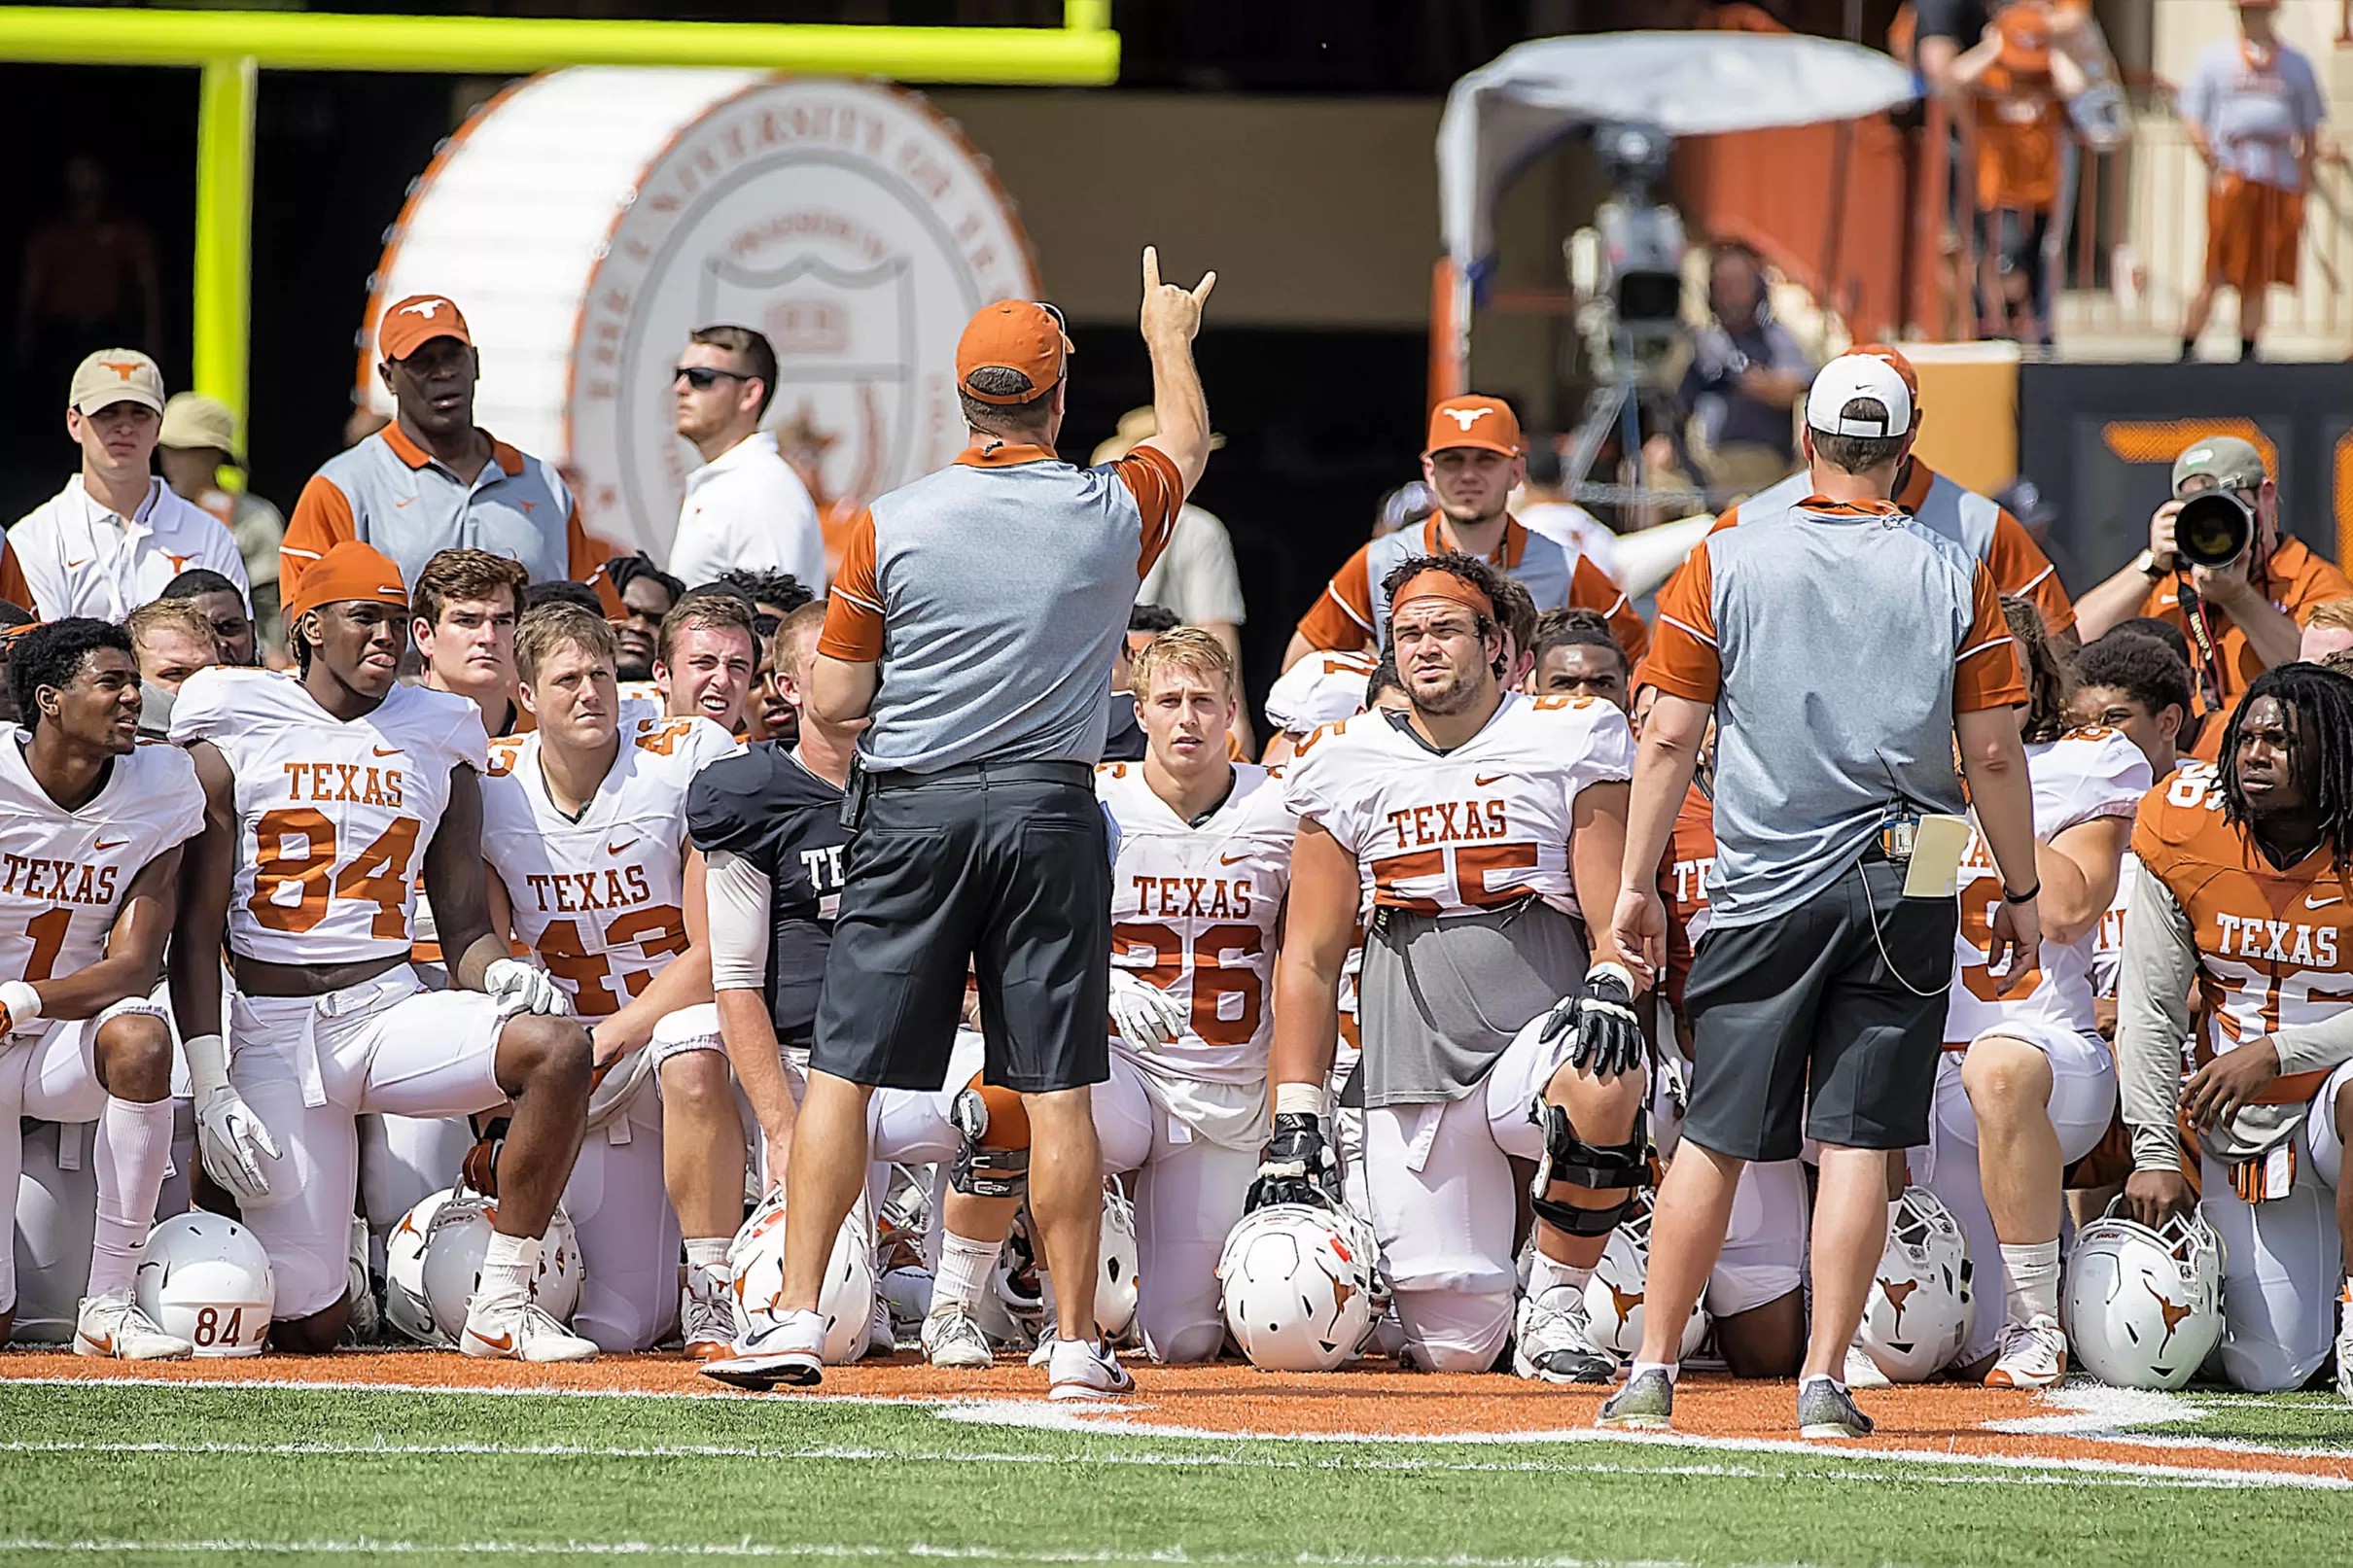 What to expect in the Texas OrangeWhite game